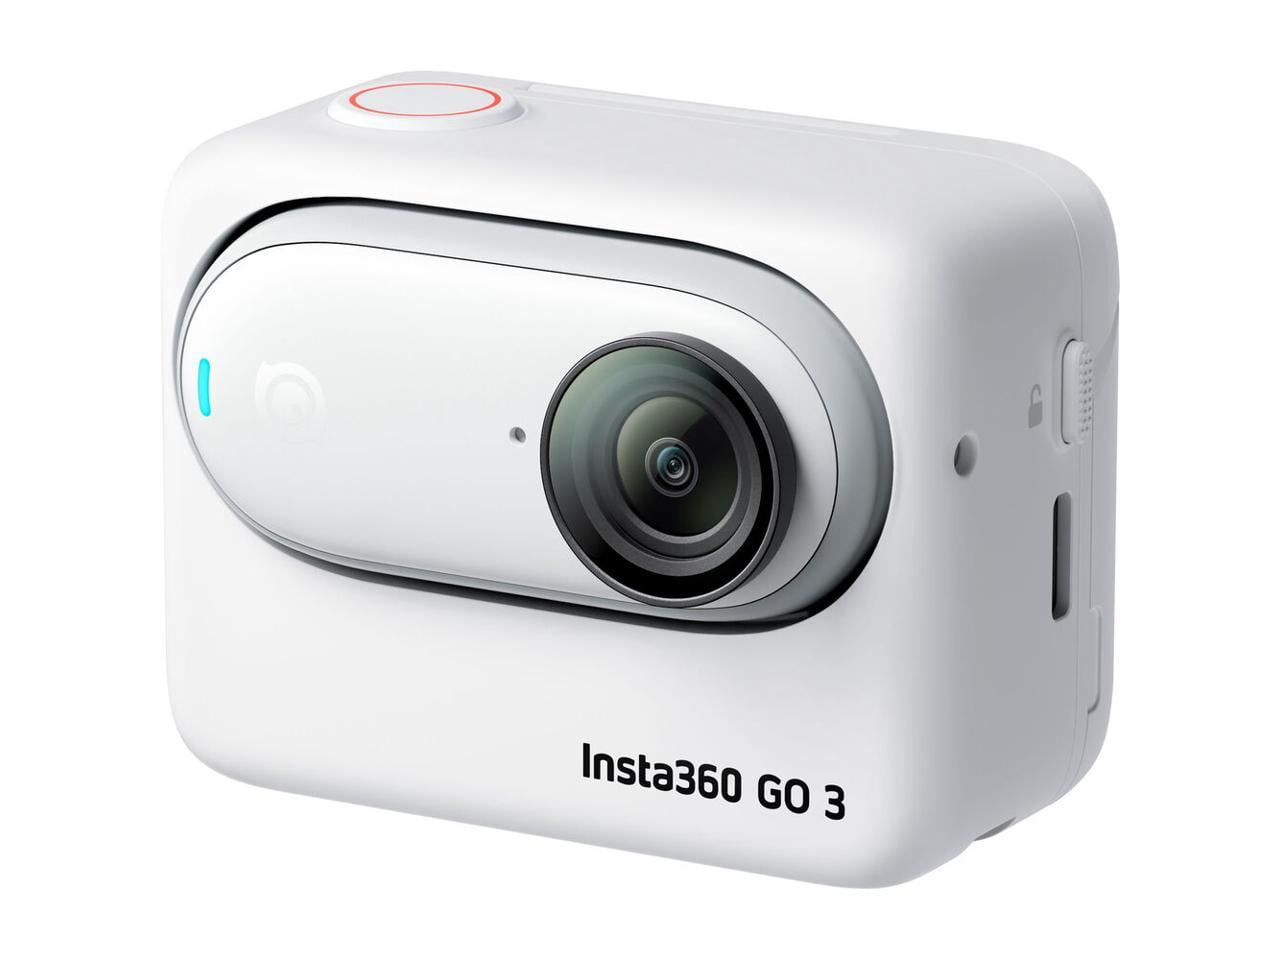 Insta360 Go 3 vs Insta360 Go 2: What's the difference?